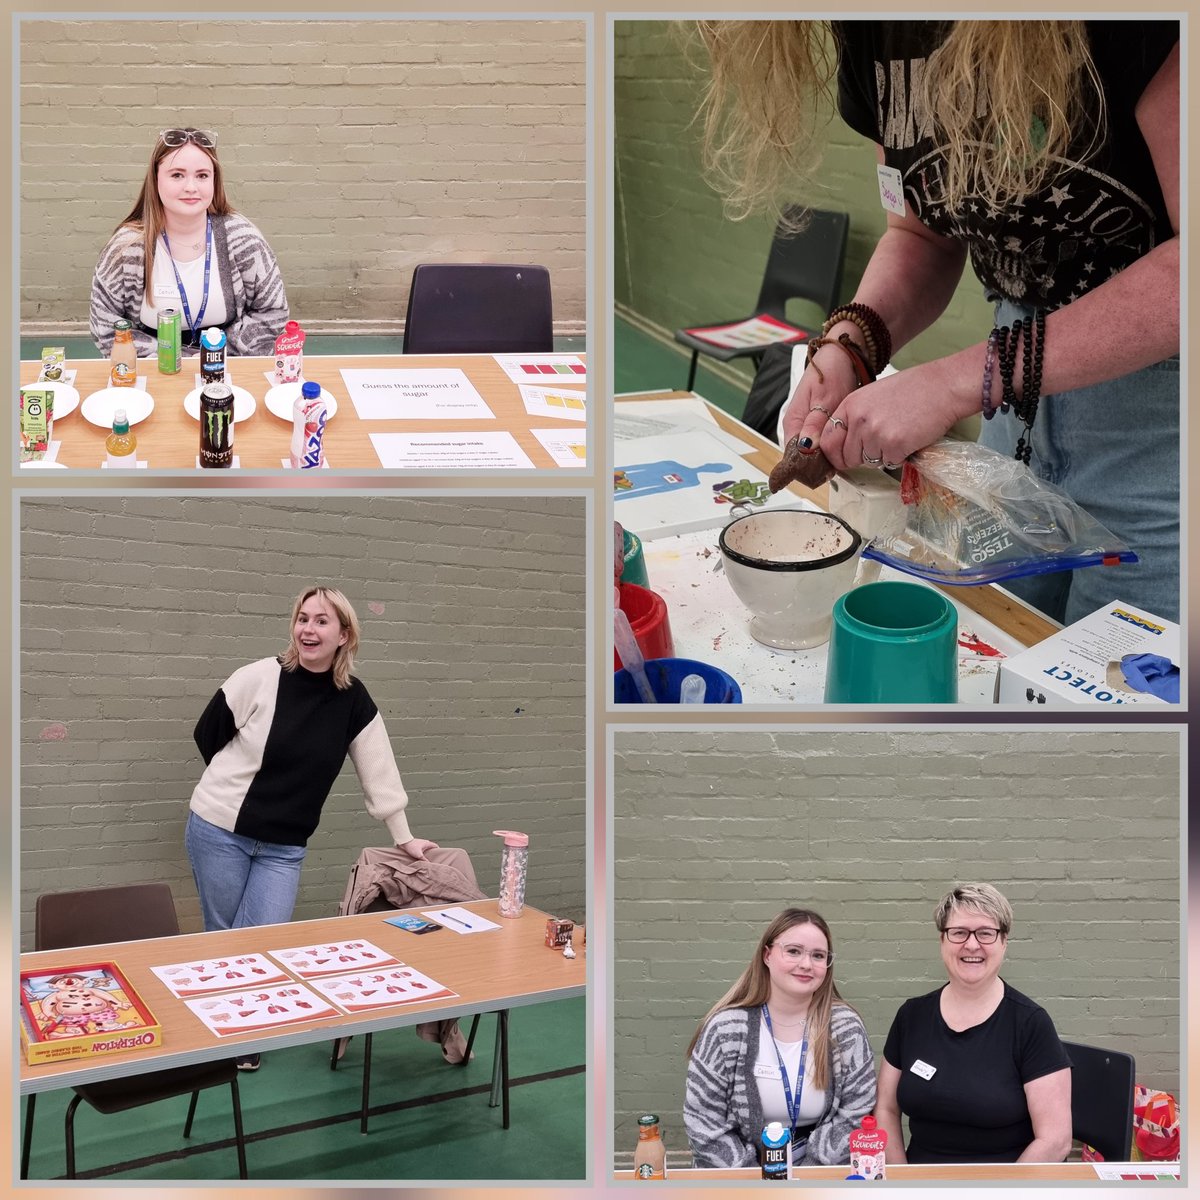 Great day with colleagues from @UoDHealthSci and the wider @dundeeuni community at Kirkton Community Centre #FamilyFun Day! Learning about making healthy choices #familycentredcare #nursing #CommunityEngagement #fun @LMarryat